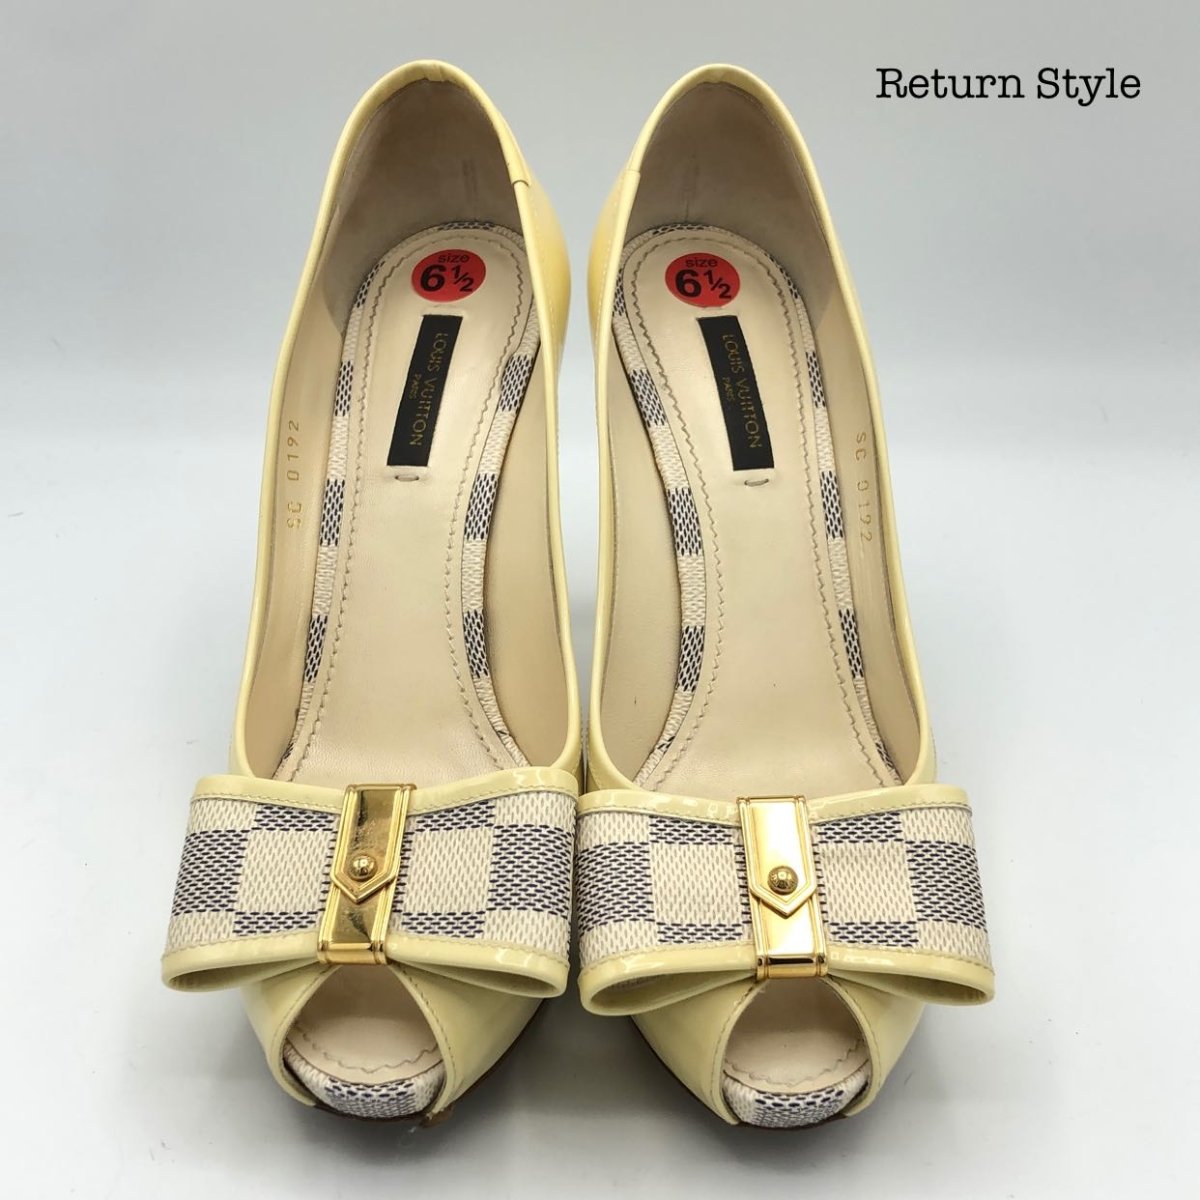 LOUIS VUITTON Ivory Gray Bow Shoe Size 36.5 US: 6.5 Shoes – ReturnStyle